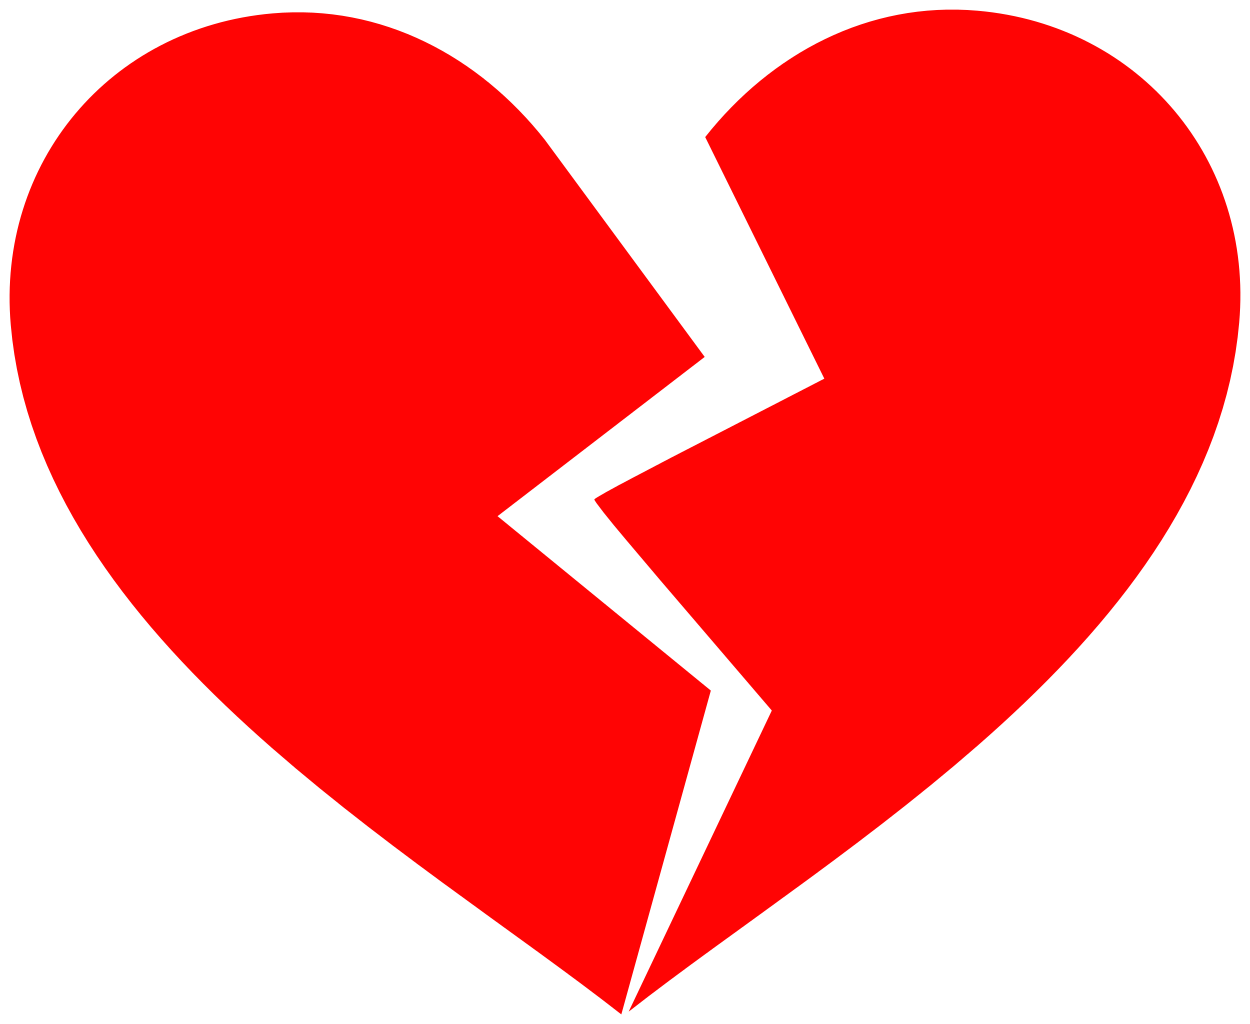 A worried person or a broken heart symbol.